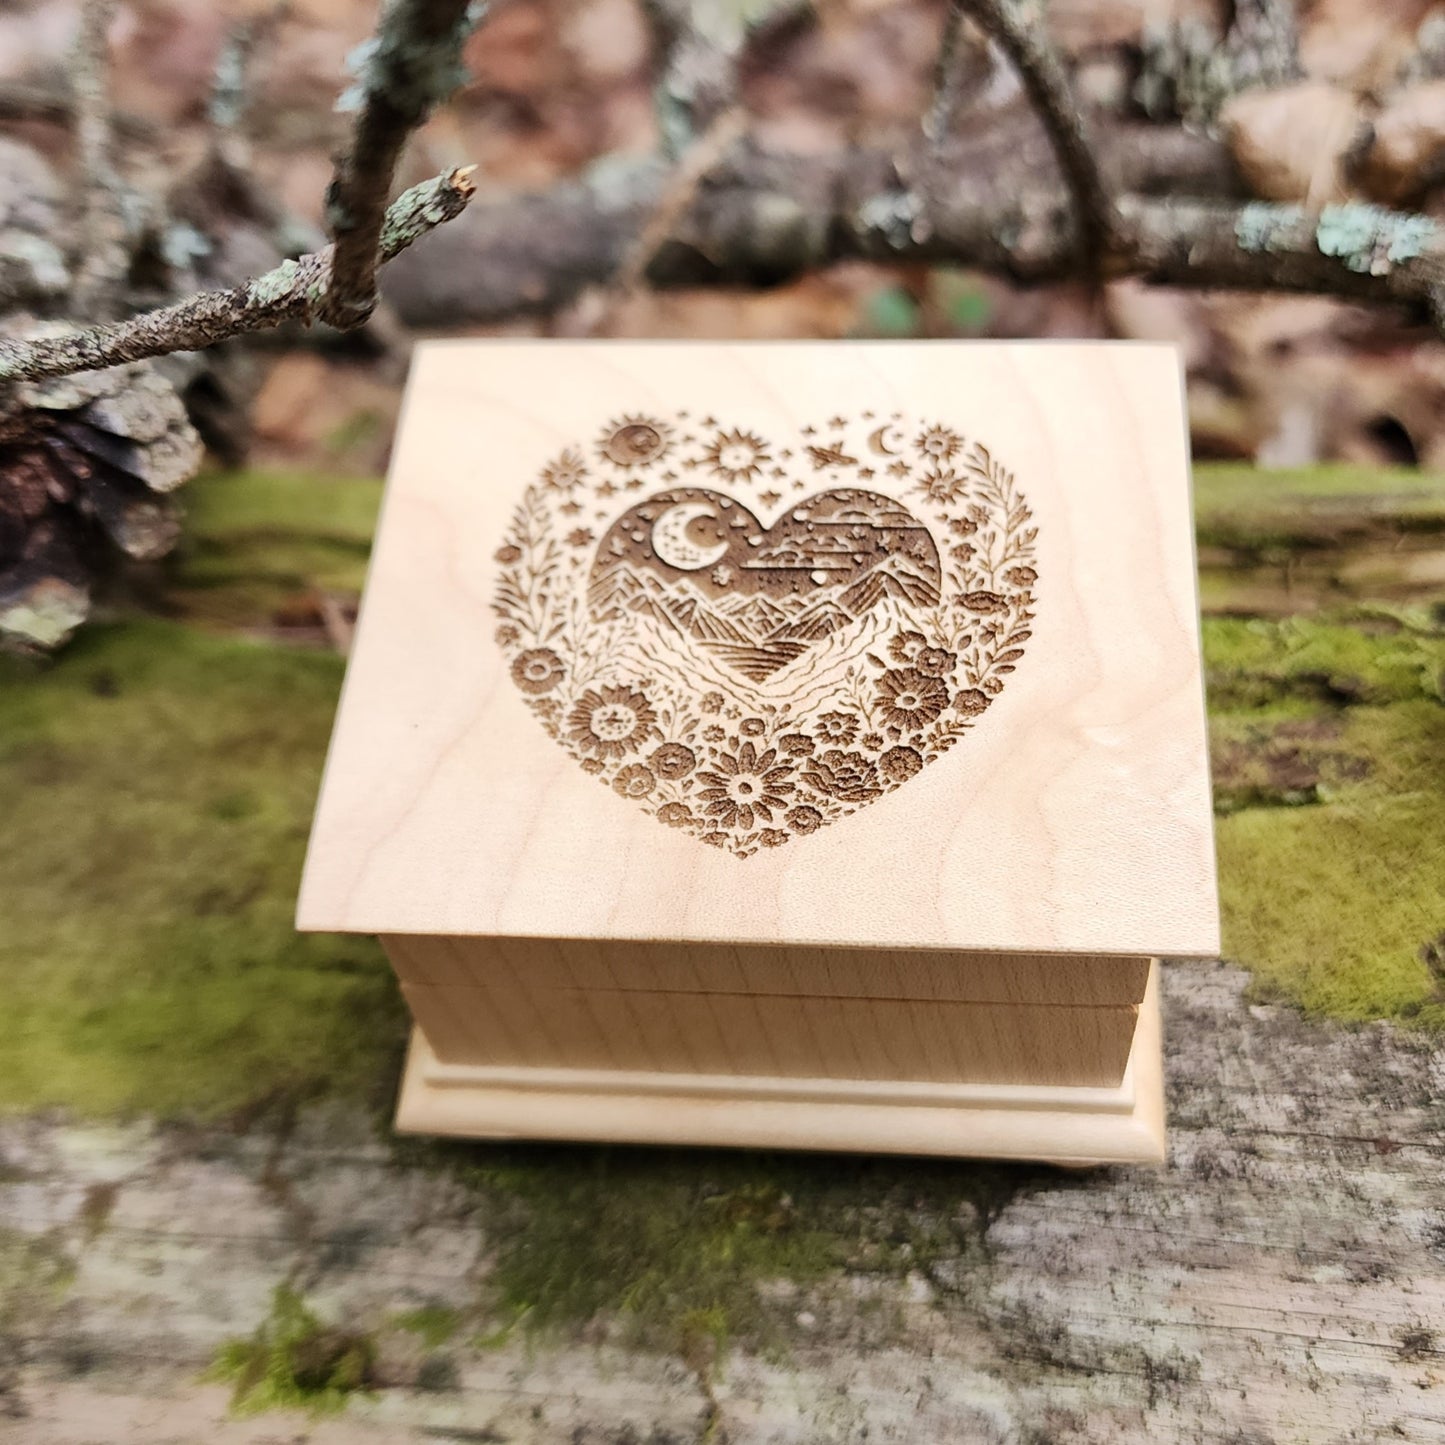 Mountain Heart music box, choose color and song, add personalized message